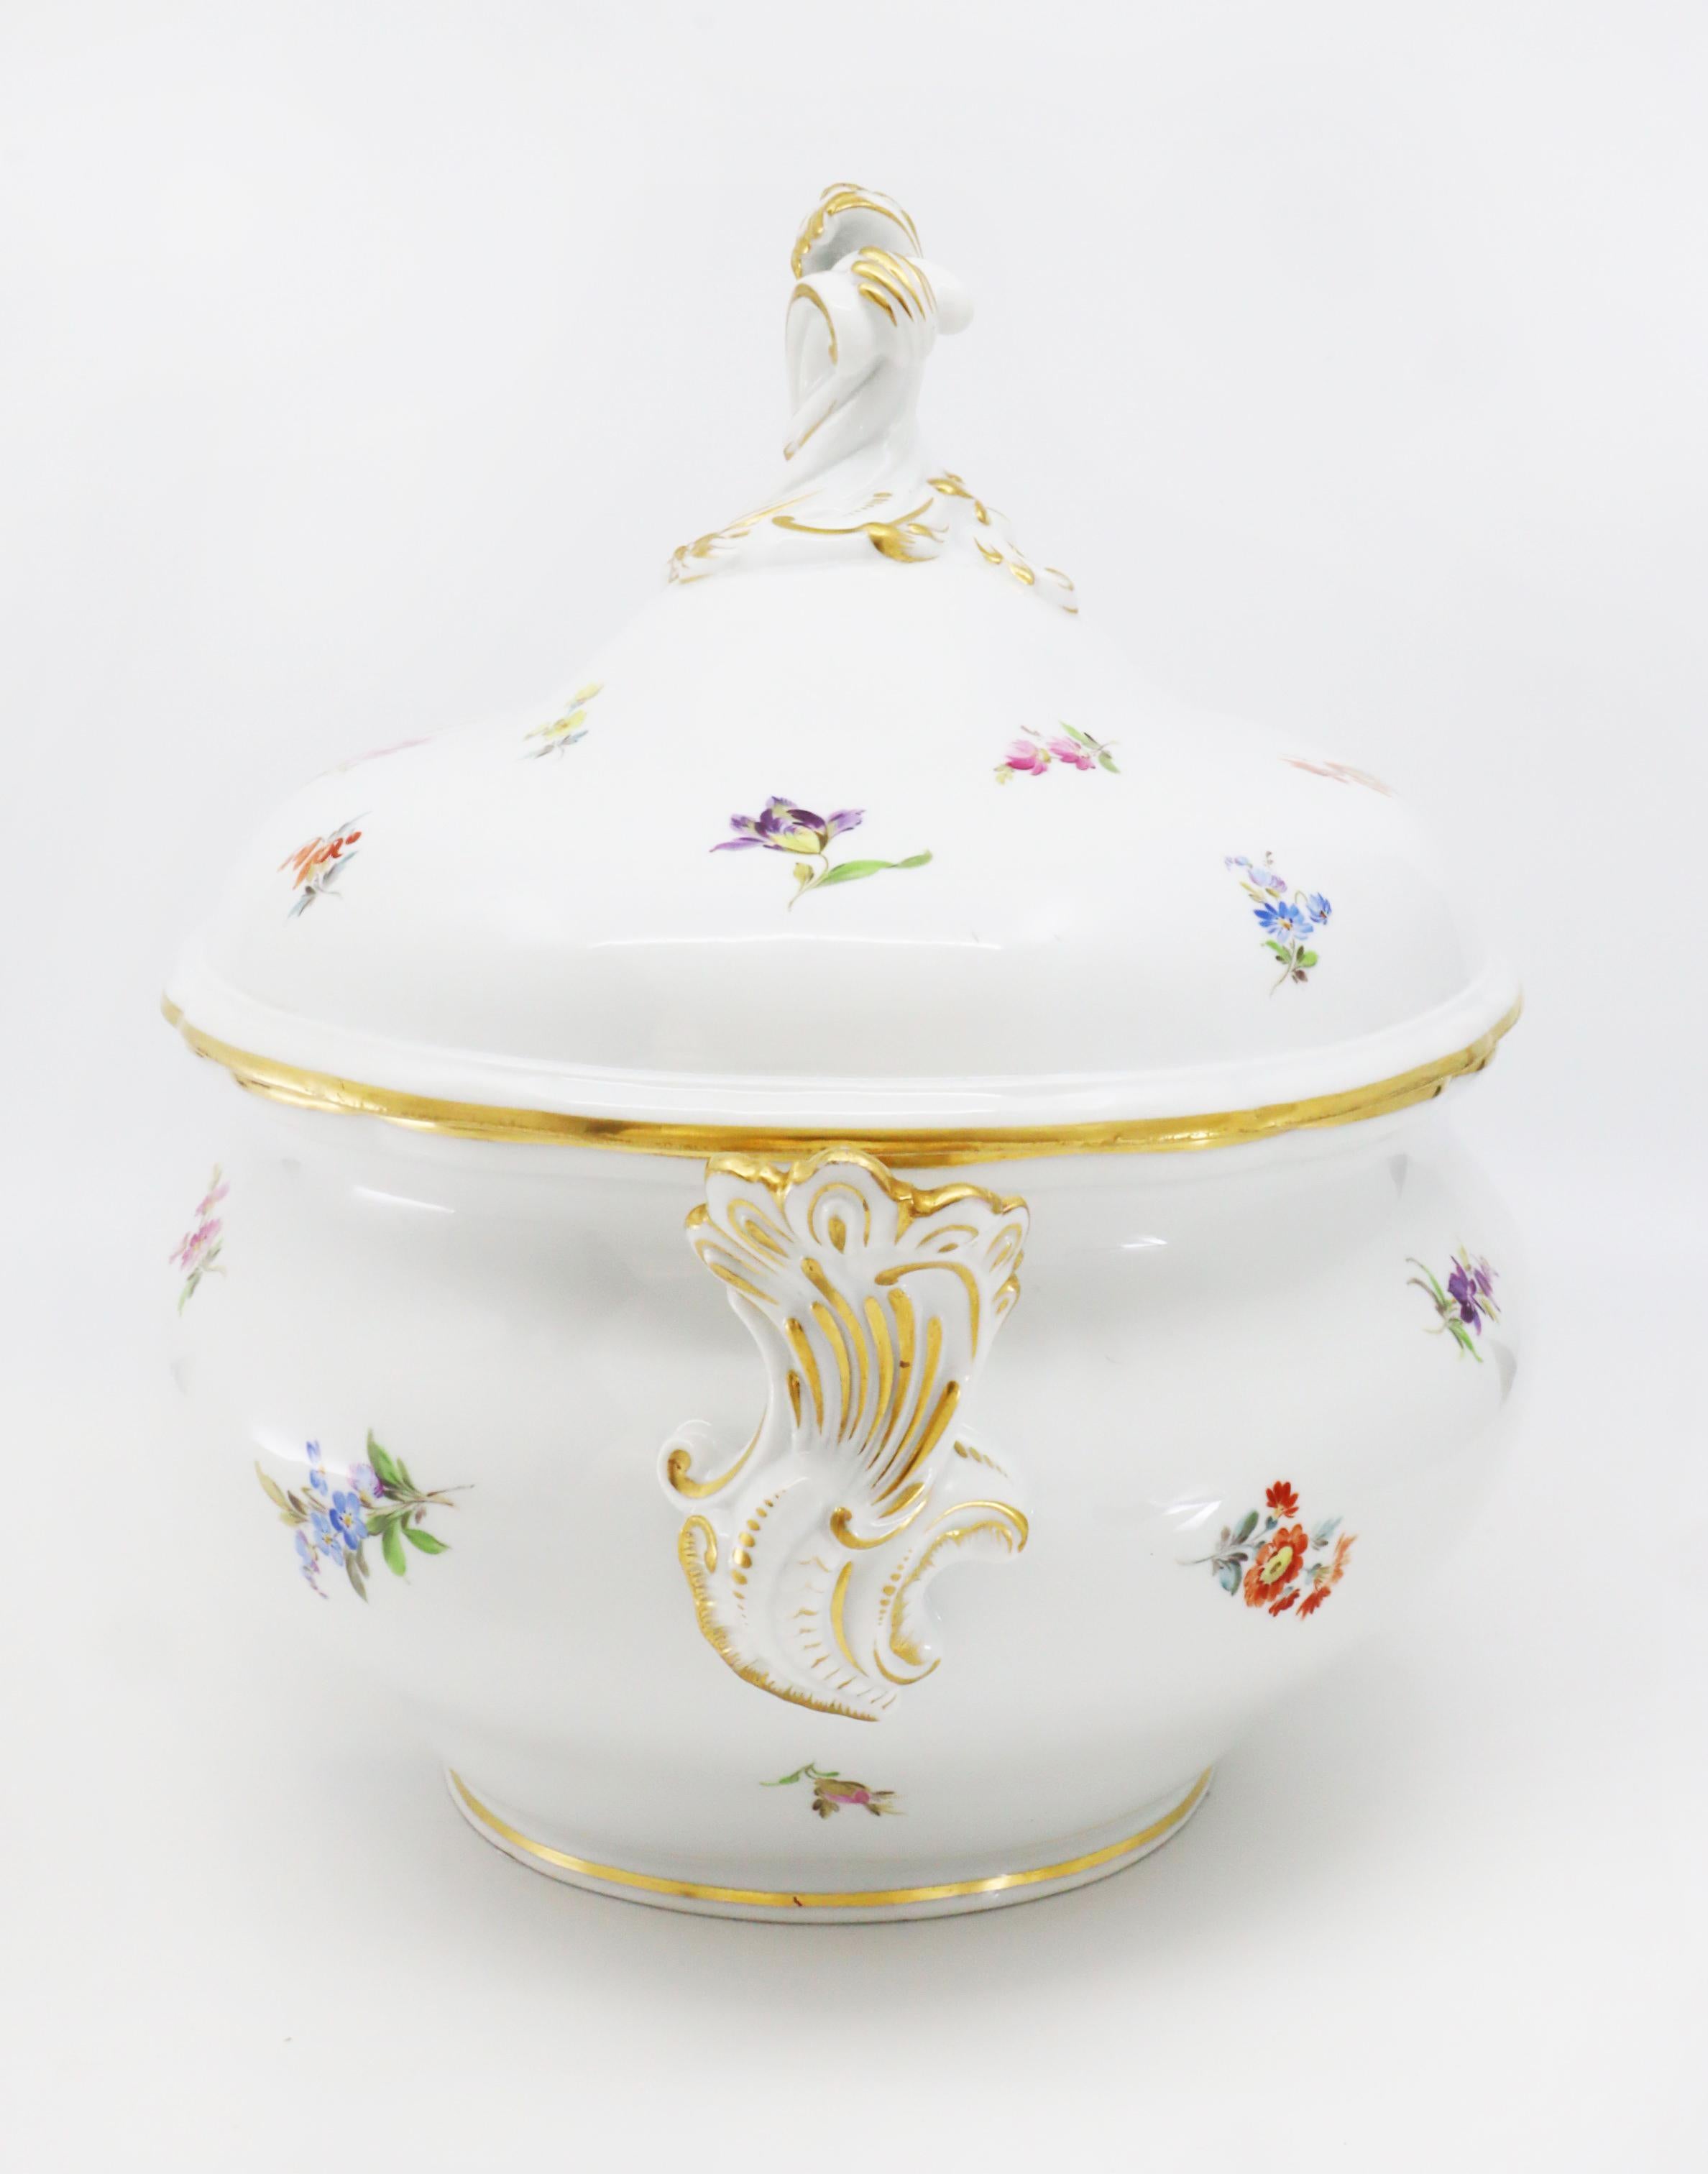 A beautiful, finely hand painted tureen, with delicate flowers and golden rims throughout 
German, early 20th century, porcelain Meissen. Marked.

Original art work(s) from Europe.
        